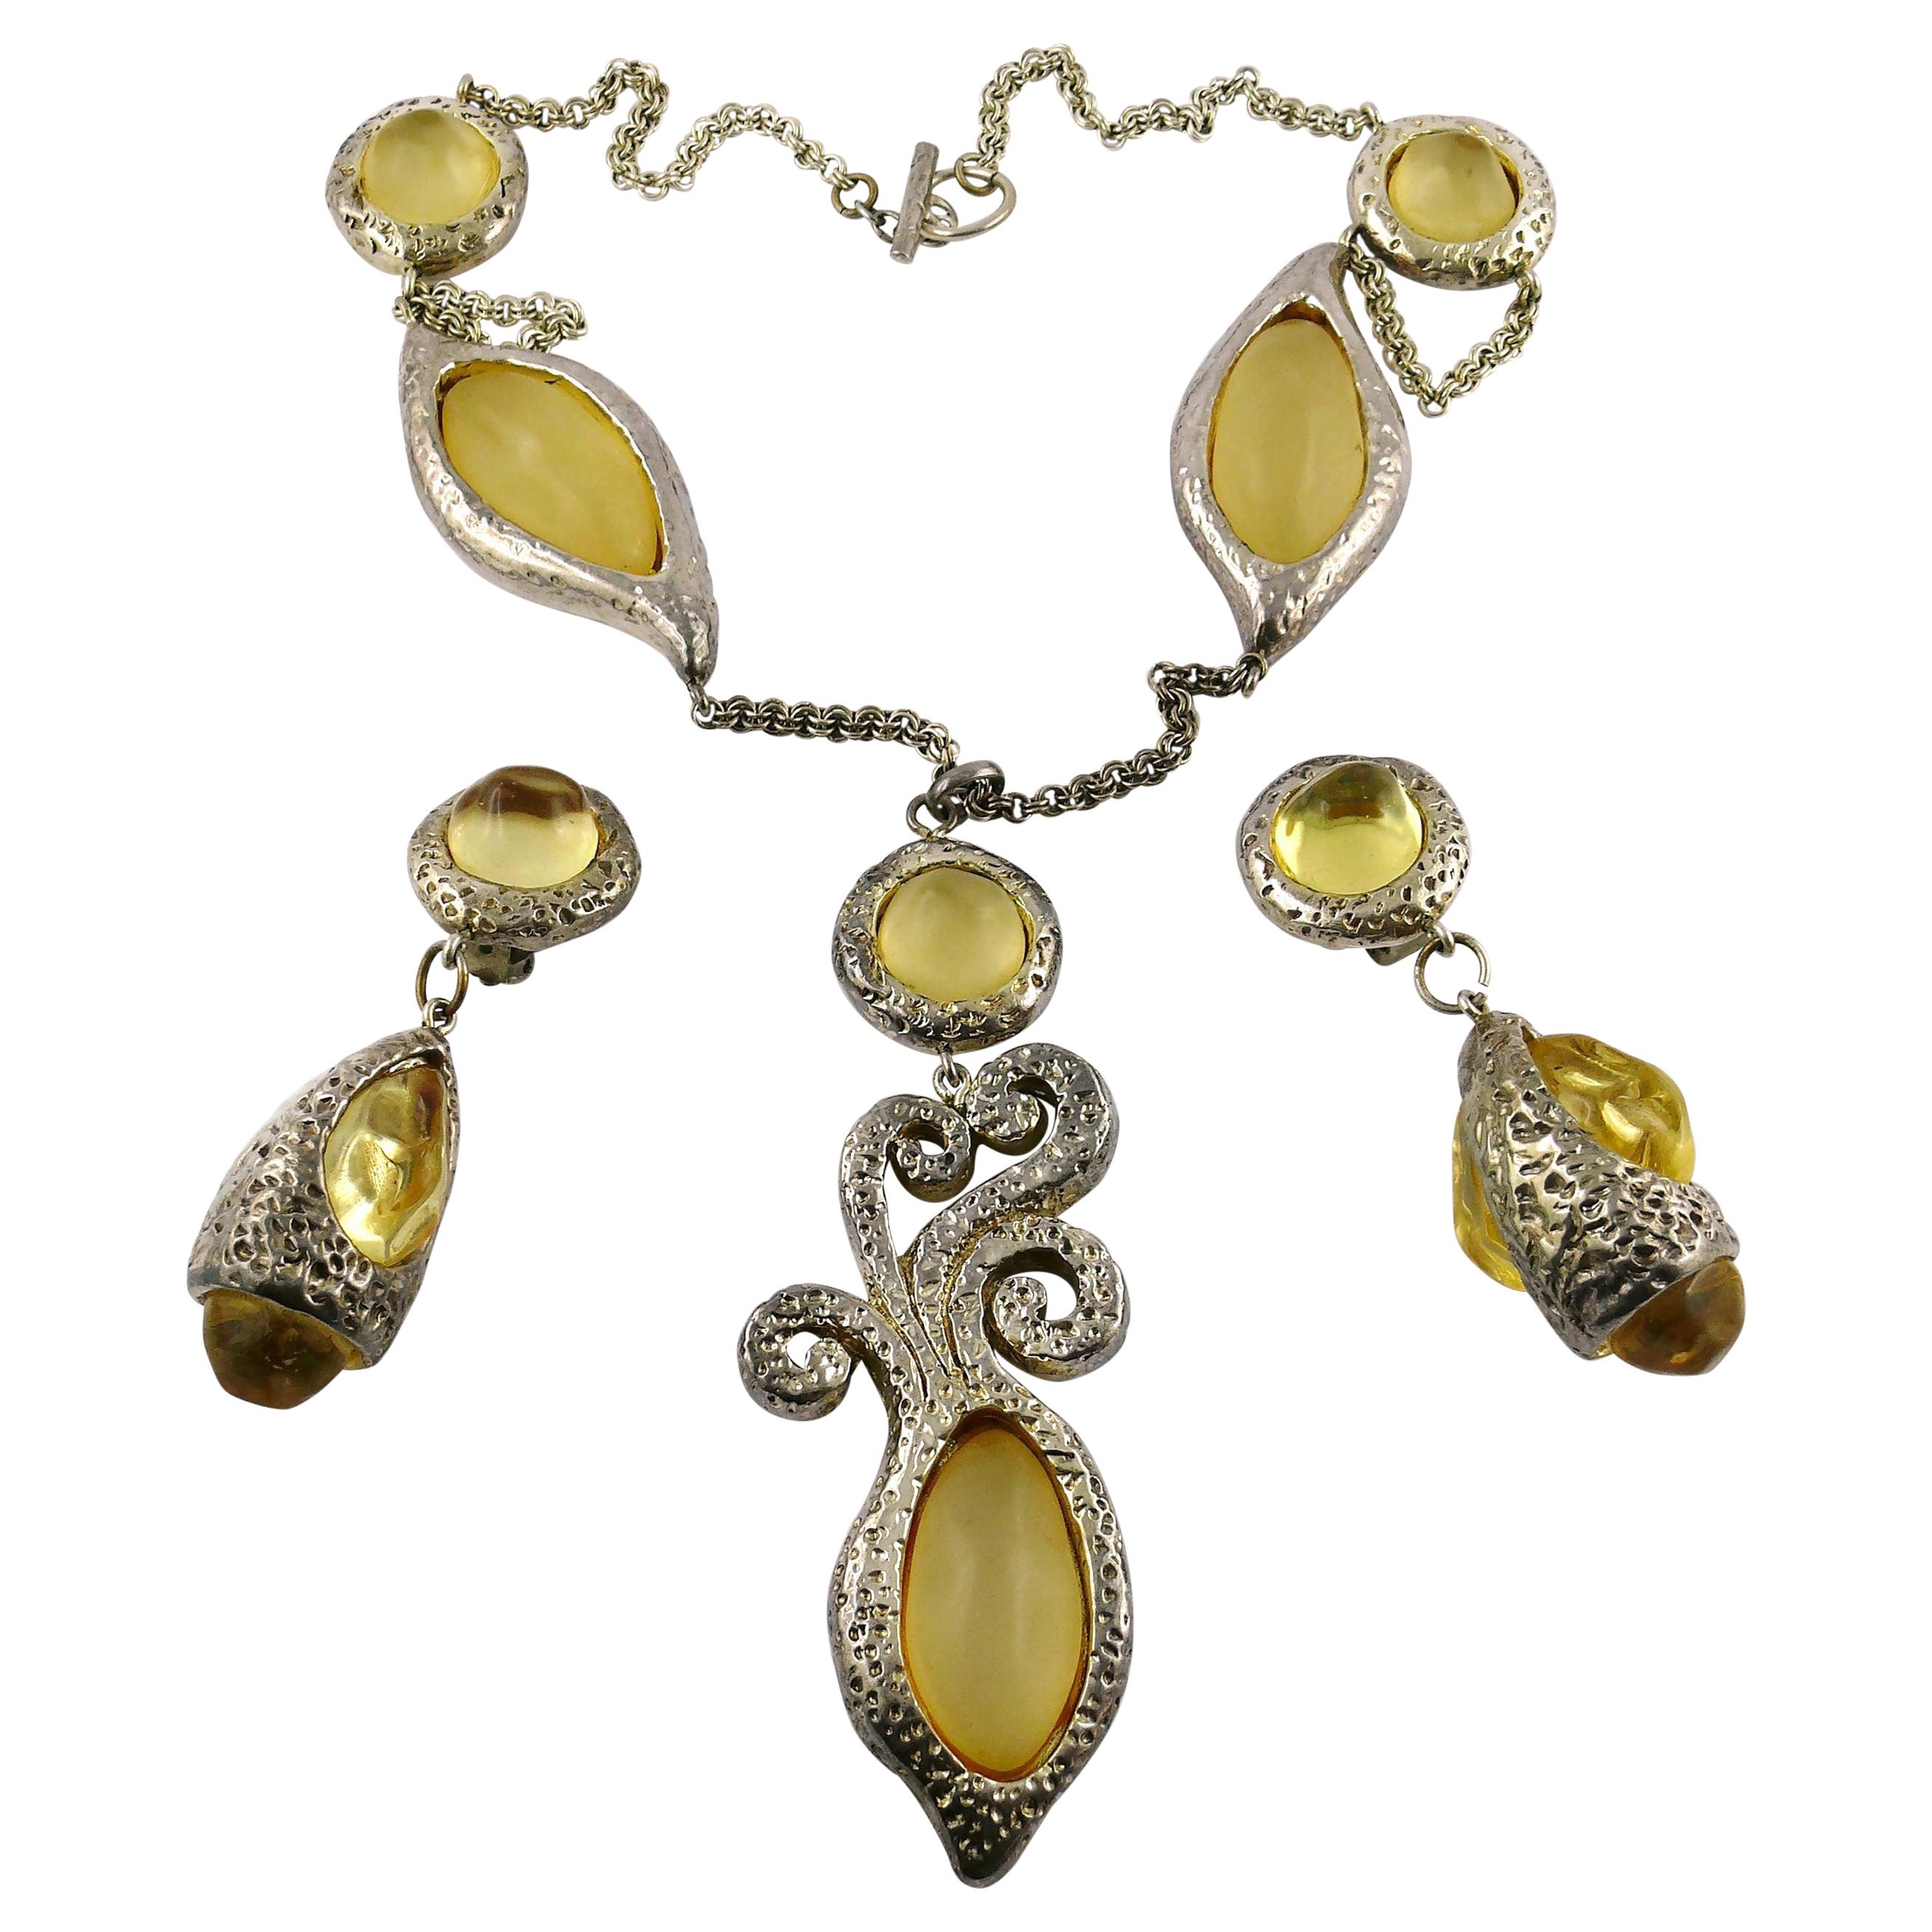 Dominique Denaive Vintage Silver Toned Yellow Resin Necklace and Earrings Set